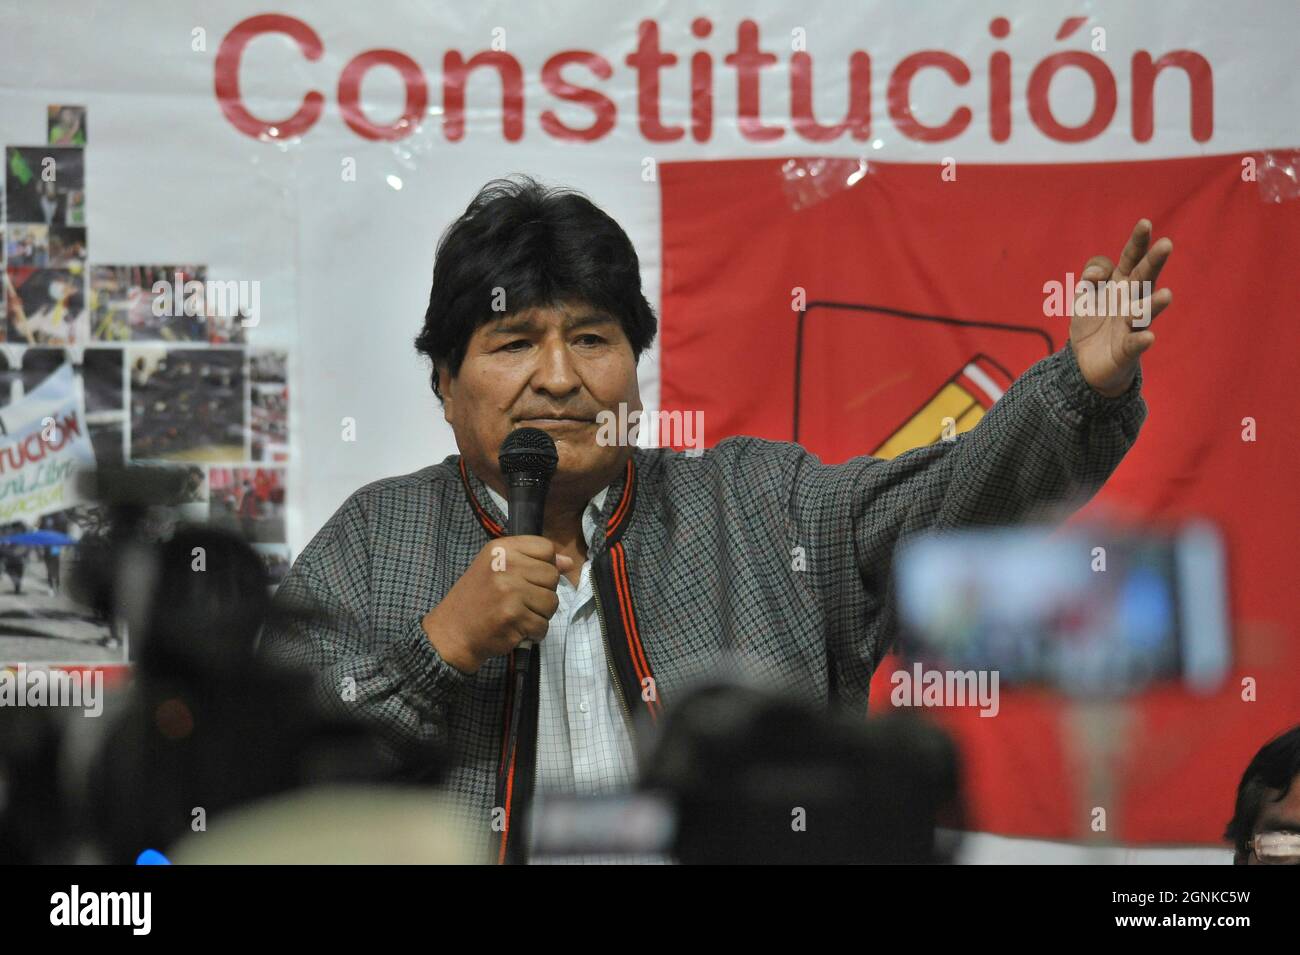 Saturday, September 25, 2021: The former president of Bolivia, Evo Morales, arrived in Arequipa (Peru) to promote the change of the Constitution Stock Photo